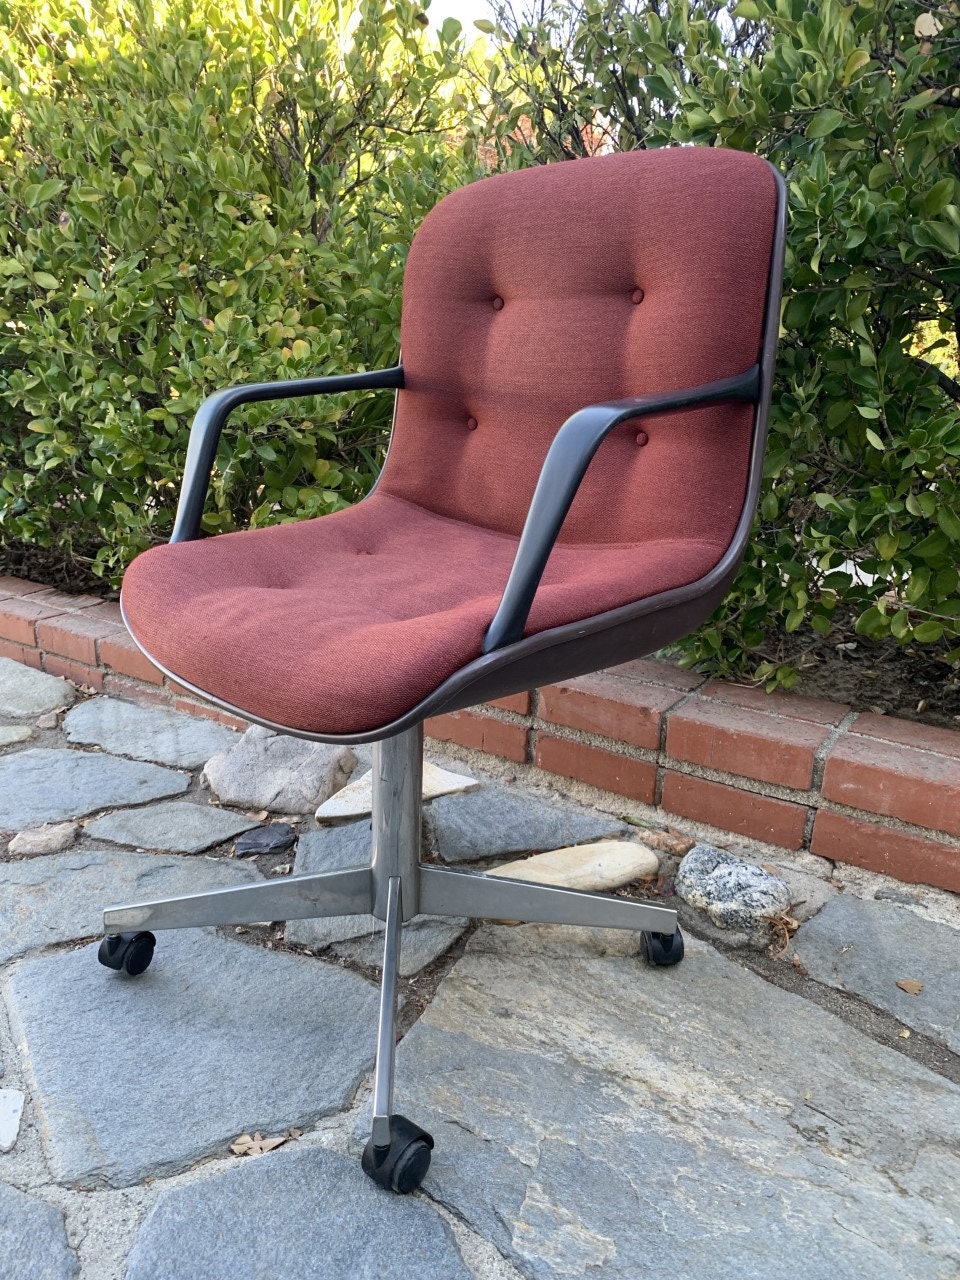 Arrow Sewing Notions Chair 